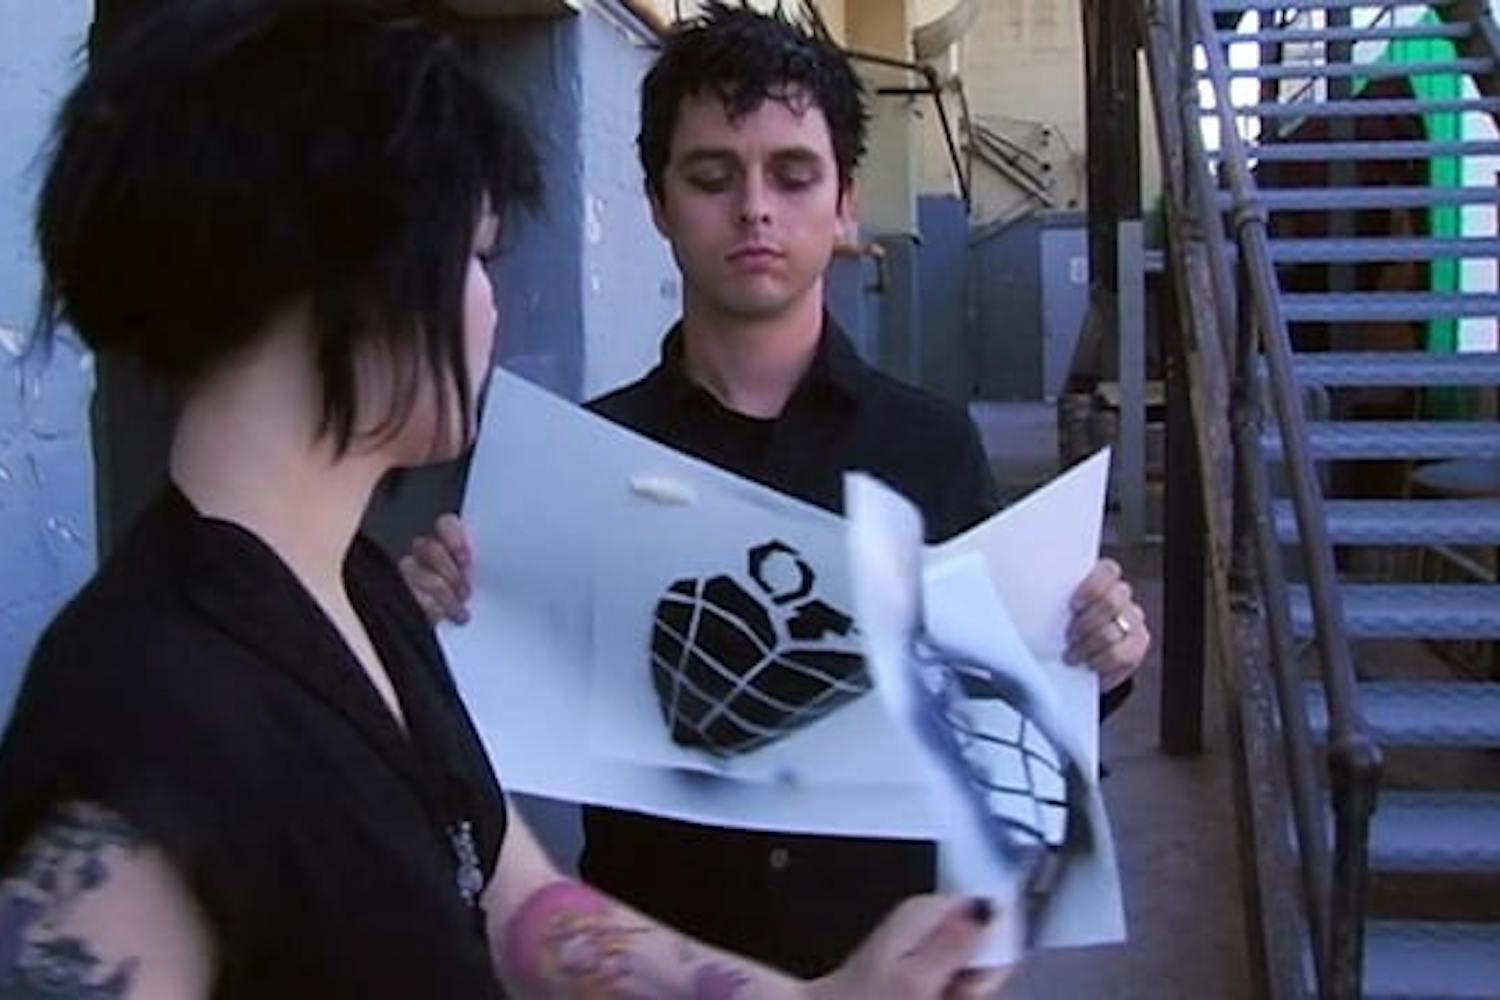 A documentary giving an inside look at the making of Green Day's album 'American Idiot'.